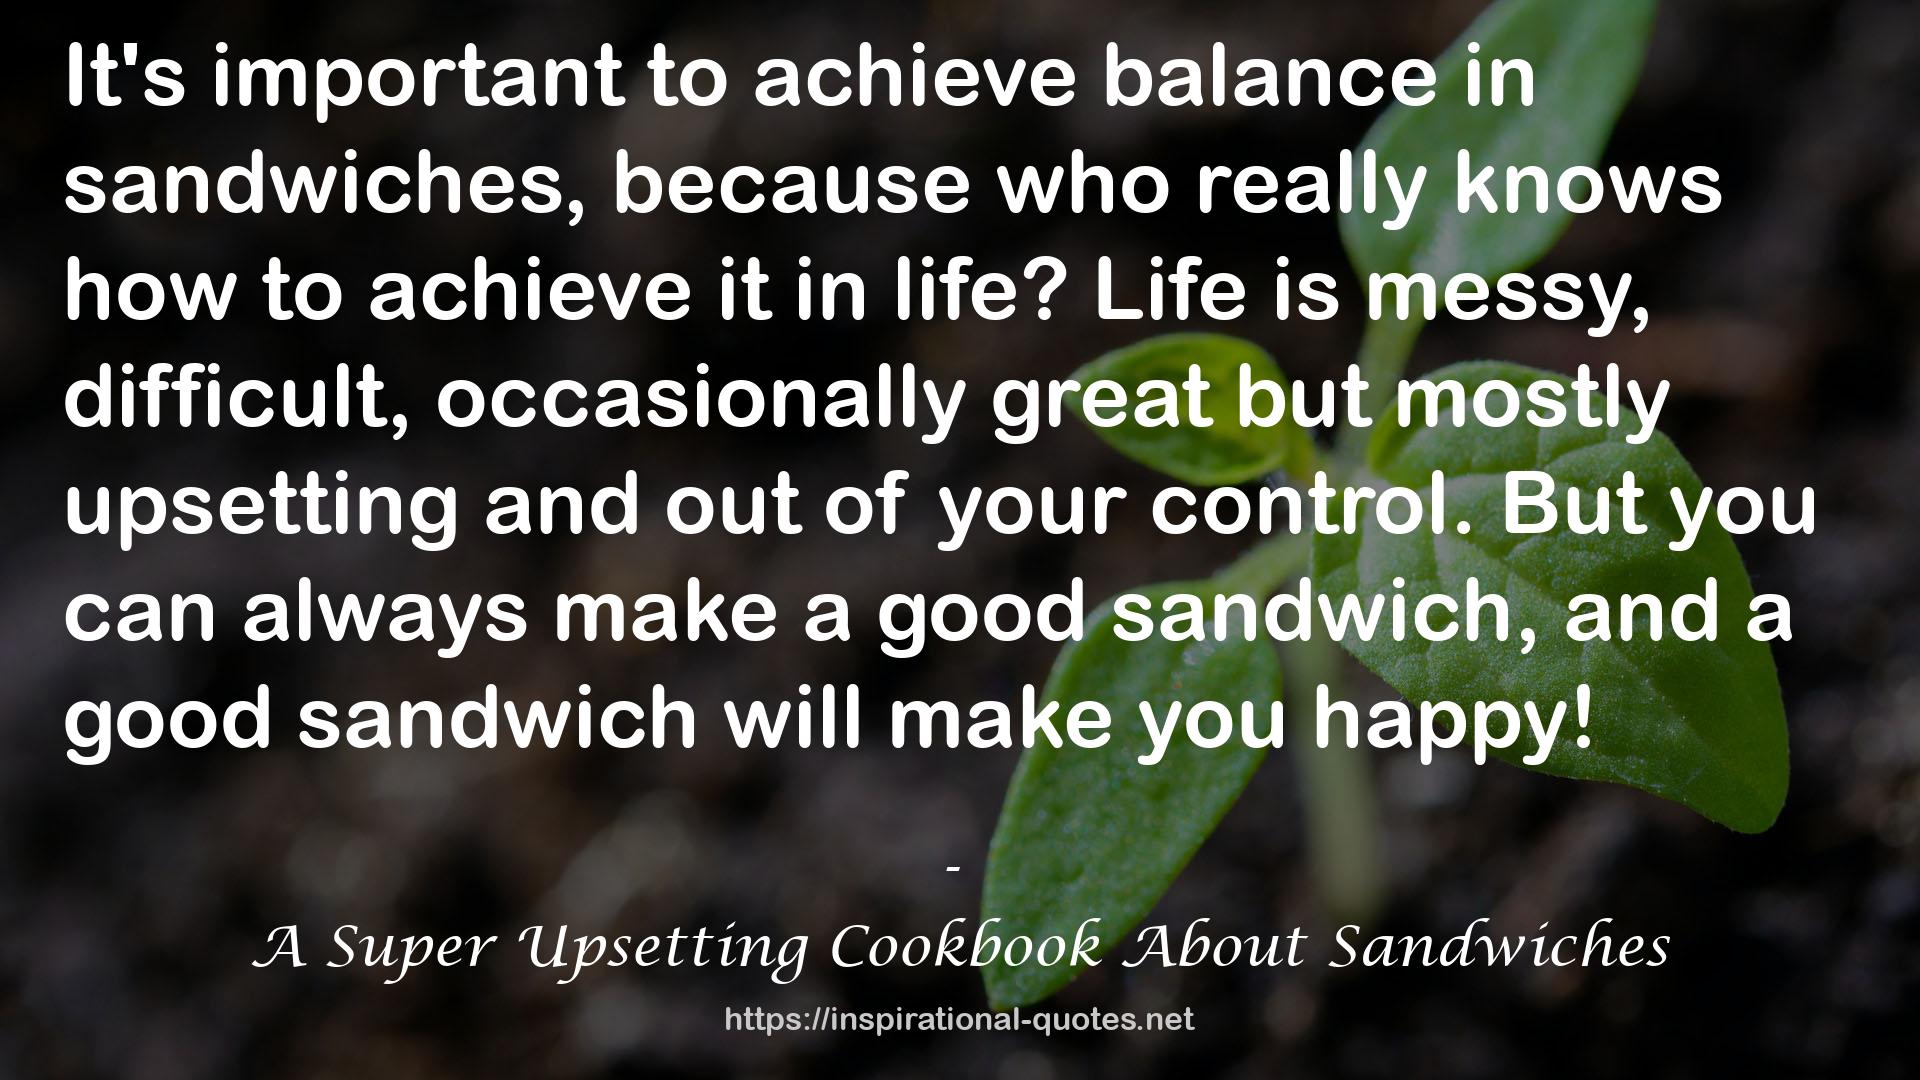 A Super Upsetting Cookbook About Sandwiches QUOTES